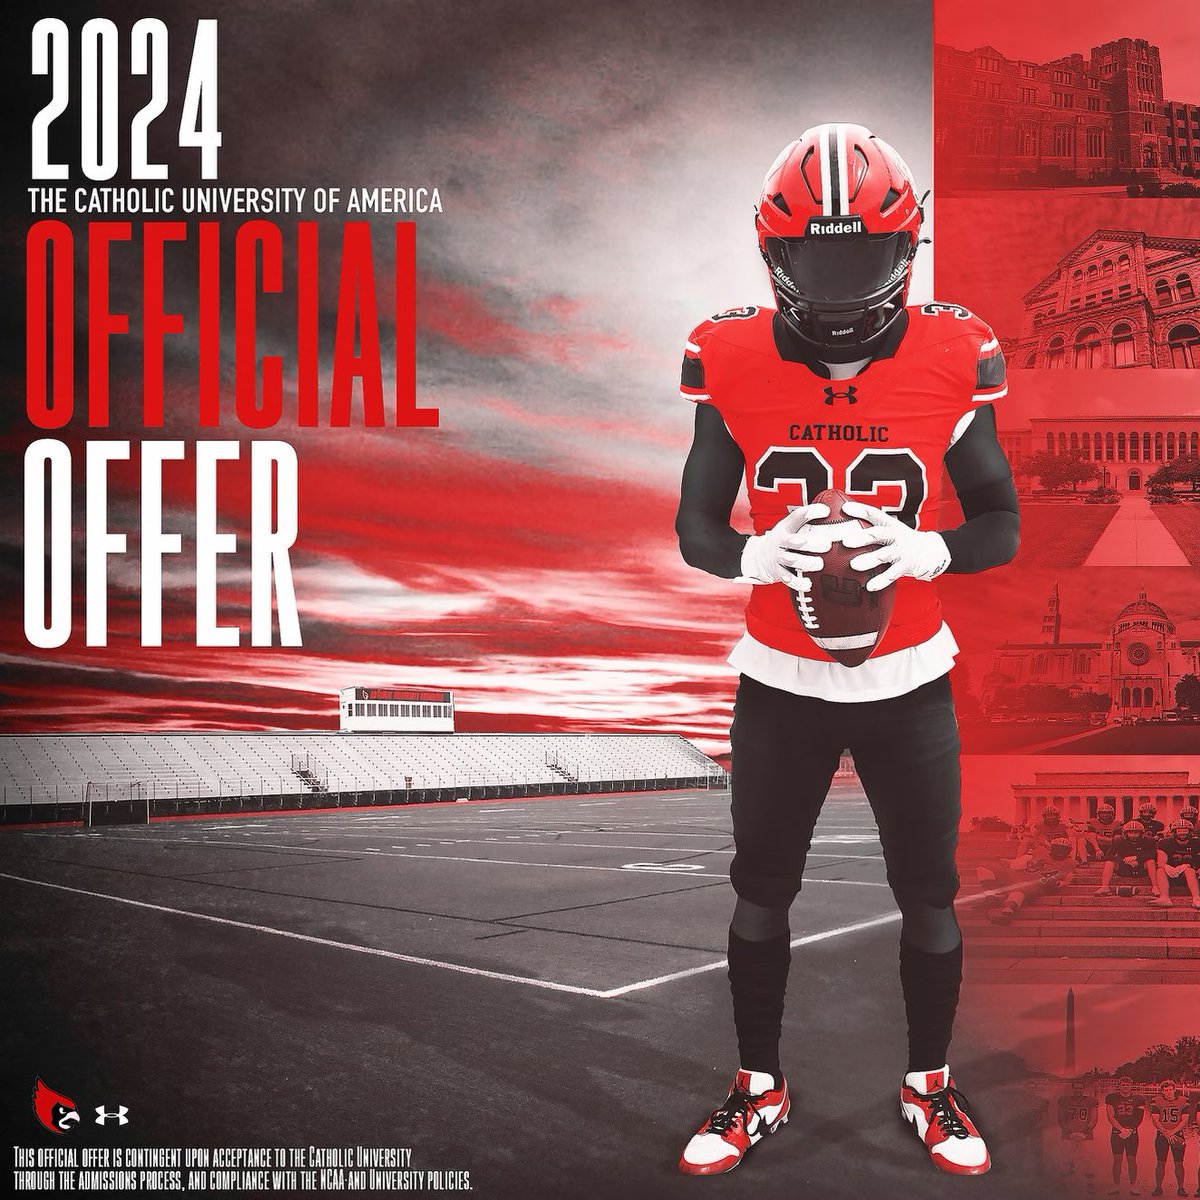 After a great conversation with @CoachJRut I am blessed to receive an offer from The Catholic University of America @T_Roken @Coach_Sug @ryne011